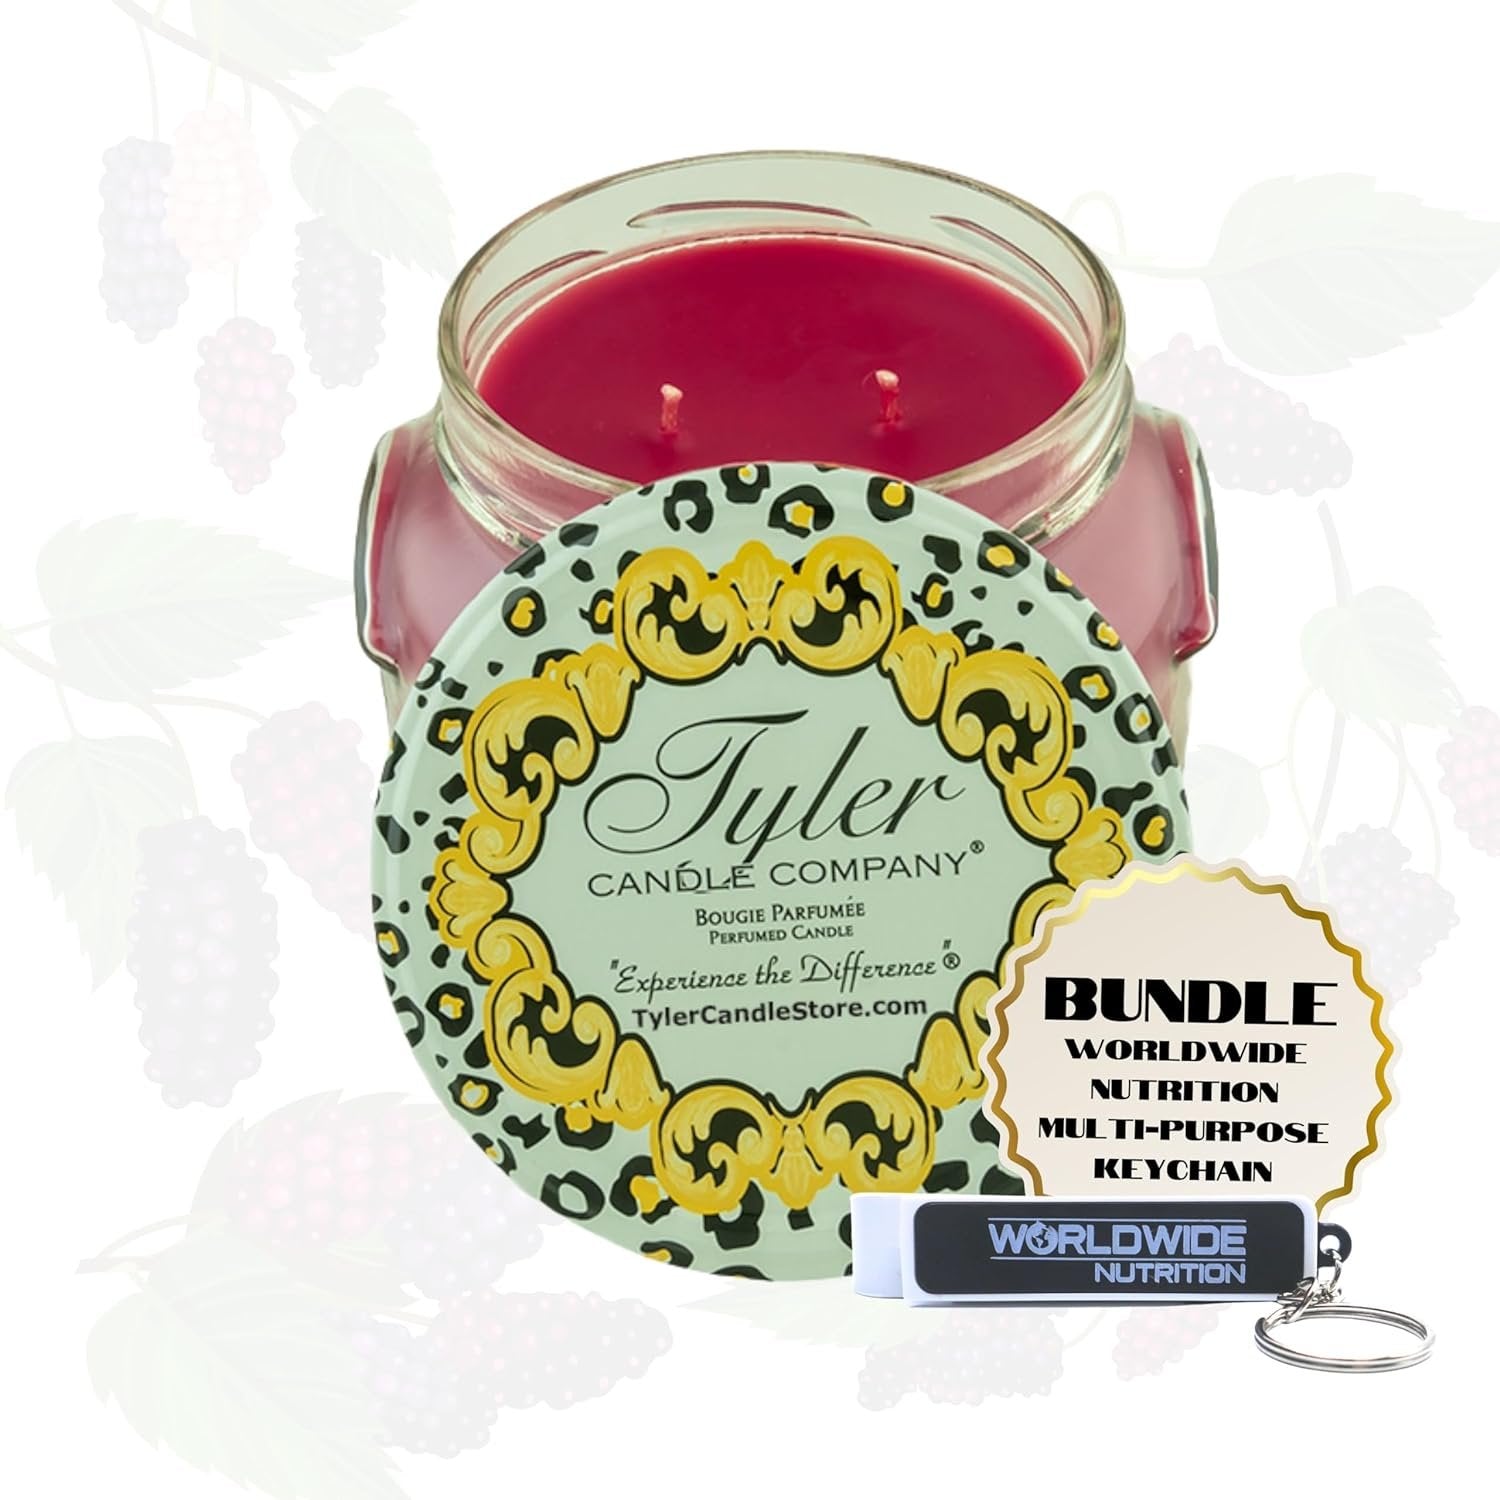 Worldwide Nutrition: Tyler Candle Company Mulberry Moments Jar Candle - Luxurious Scented Candle with Essential Oils - Long Burning 22 oz Extra Large Candle and Multi-Purpose Key Chain